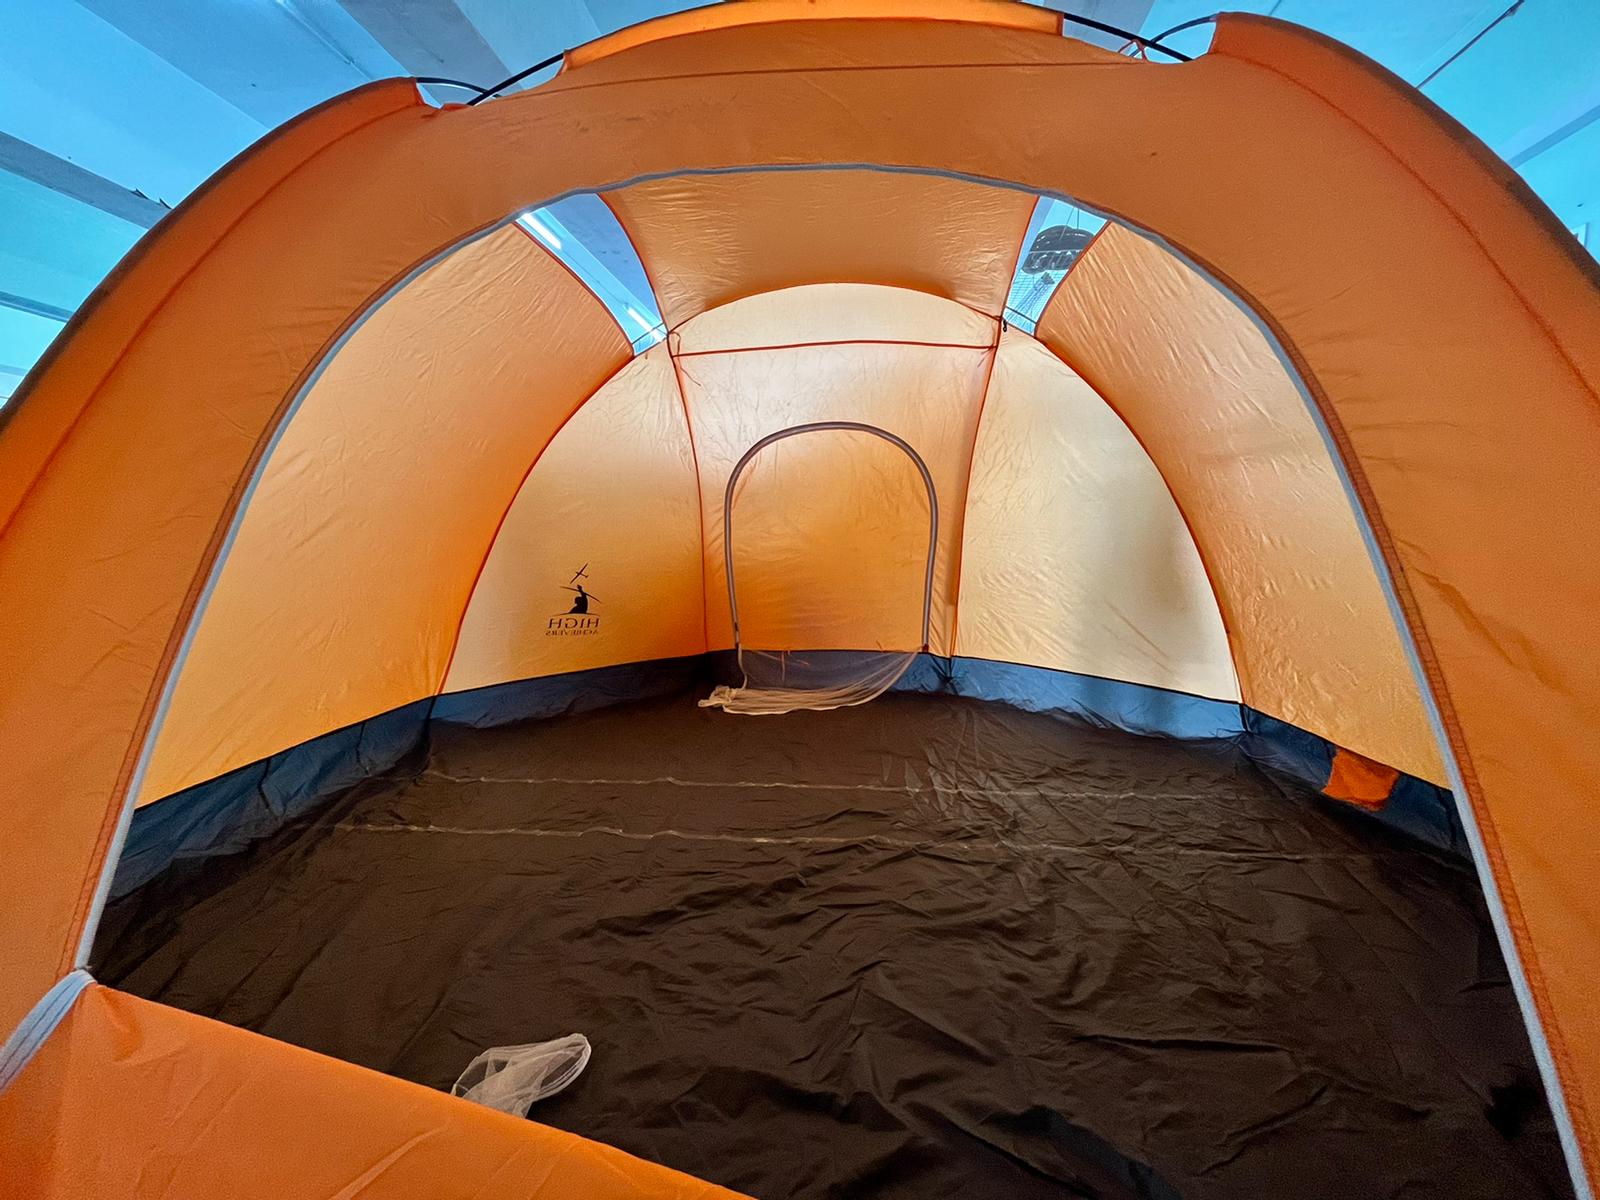 Camping Tents *RENTAL* in Singapore - High Achievers